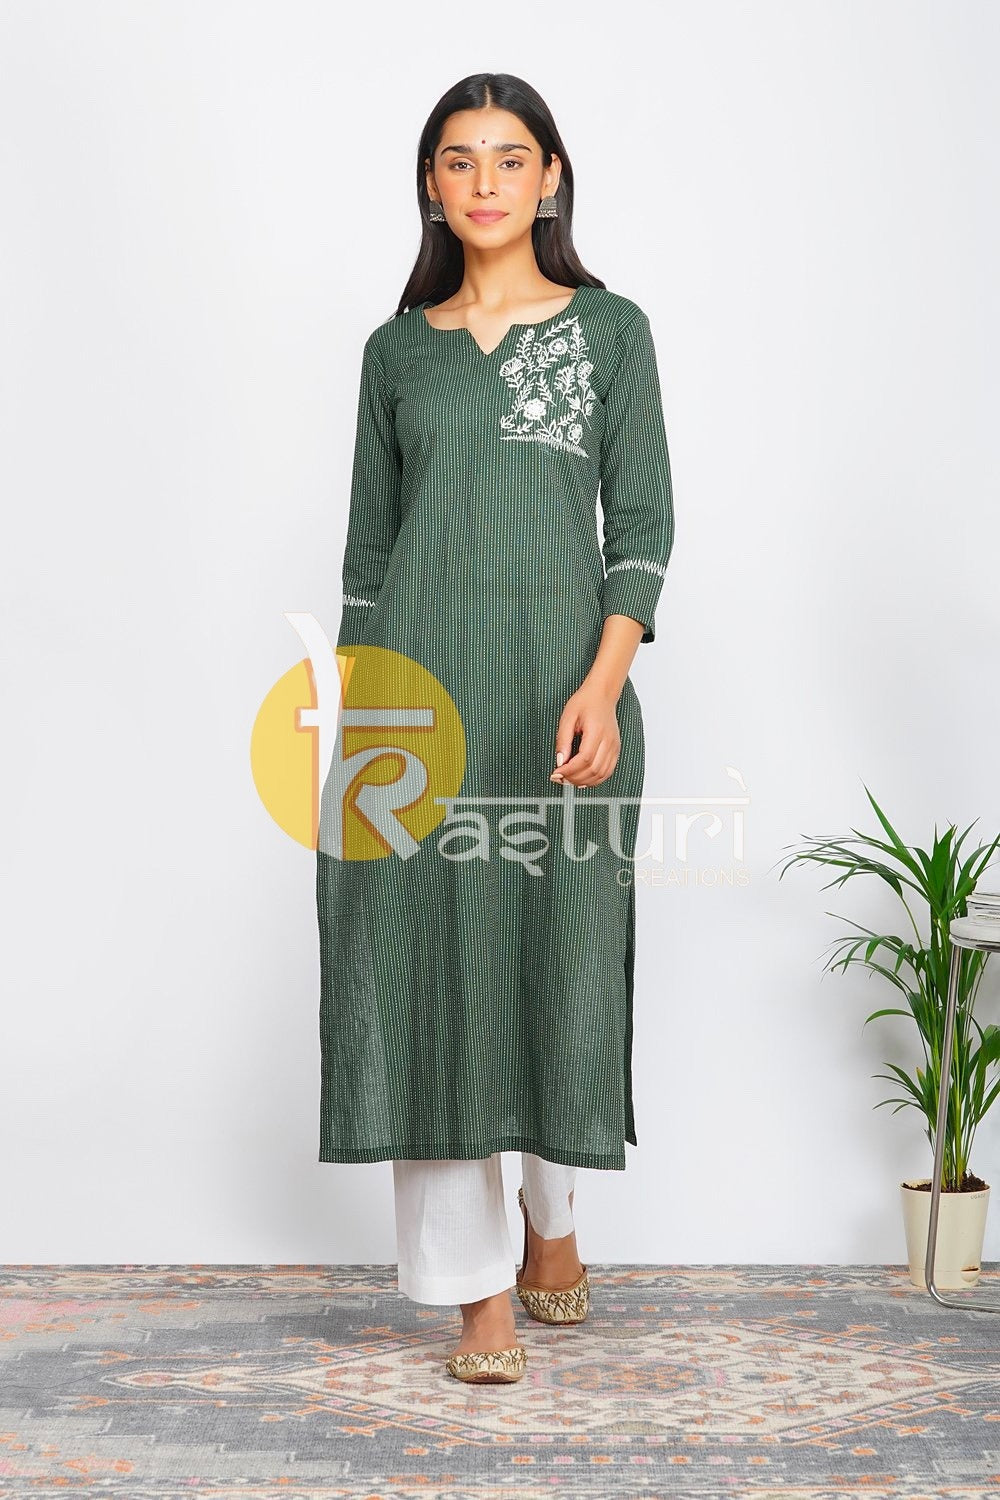 Emrald green and white cotton embroidered kurta with pant set